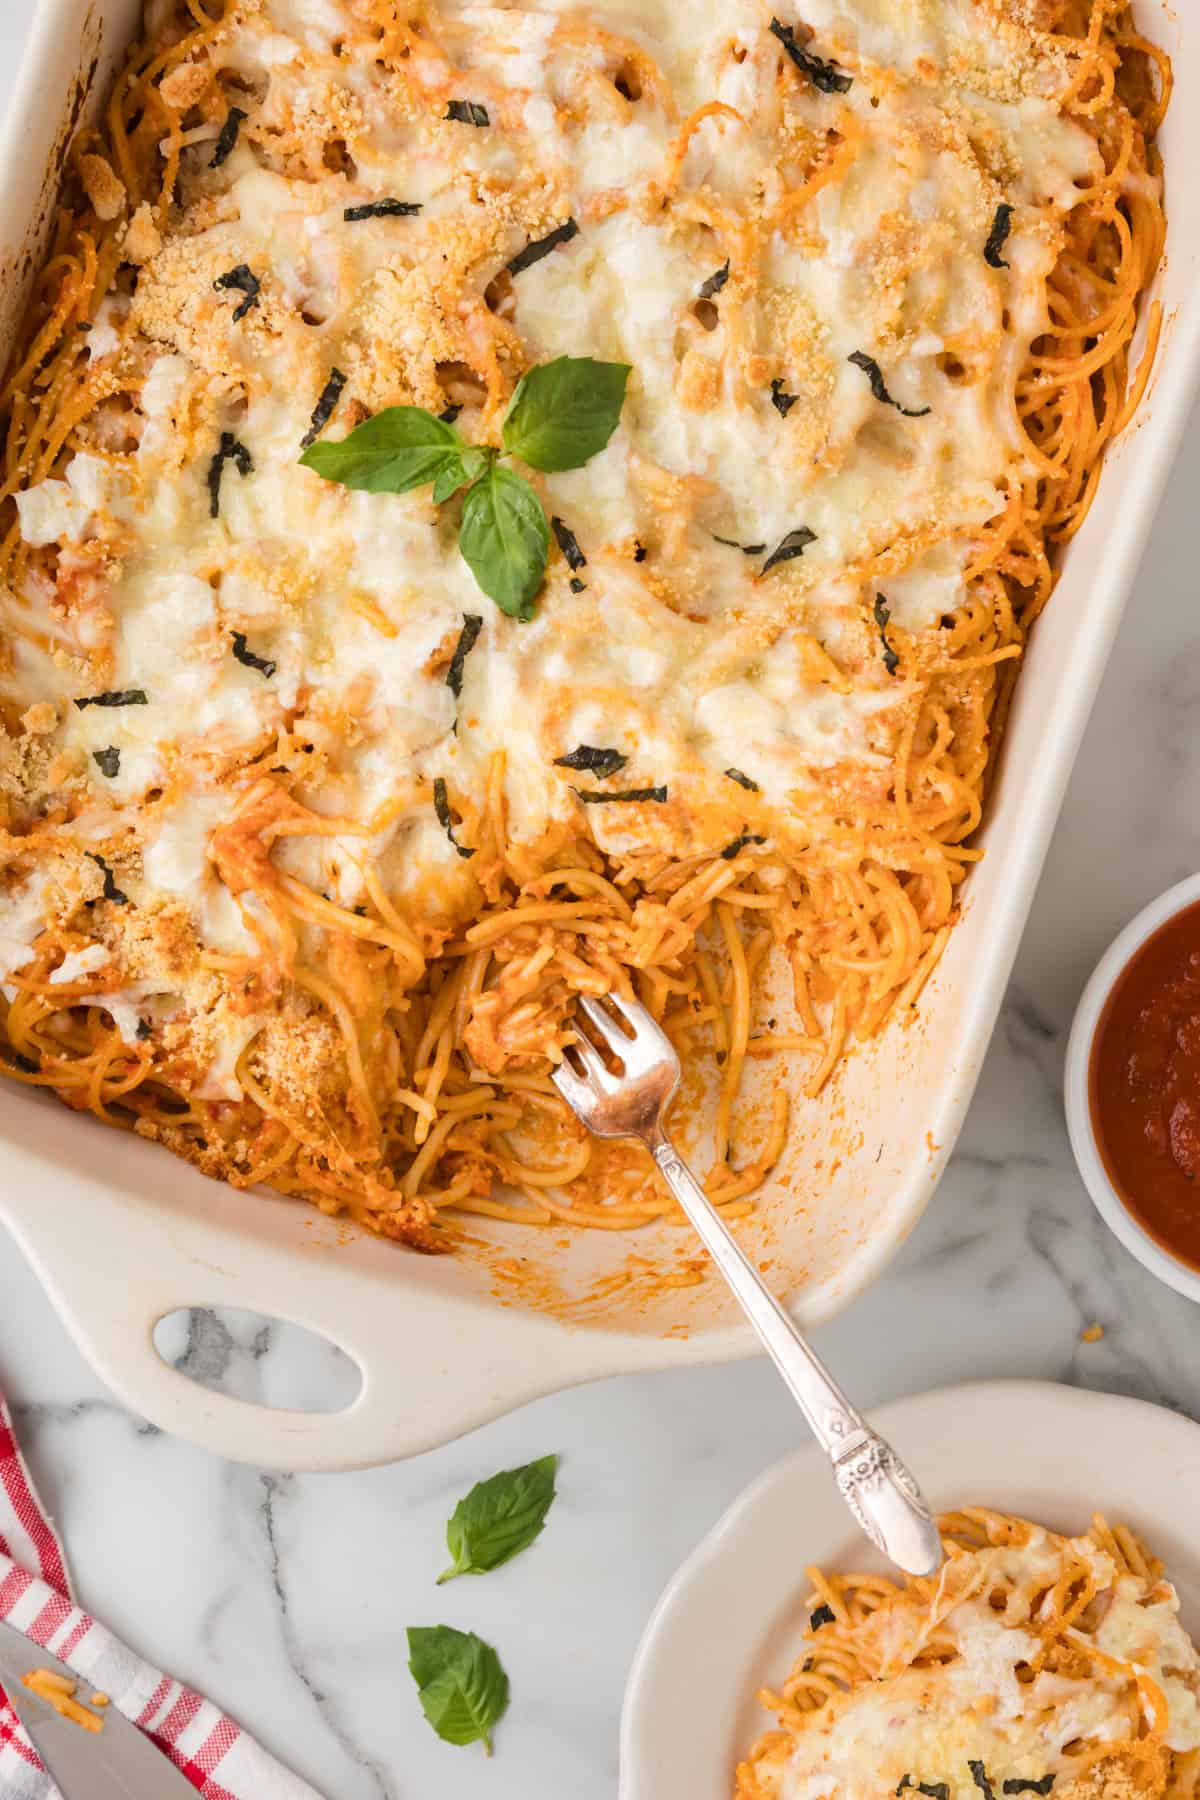 baked Spaghetti casserole in a white dish with a fork.